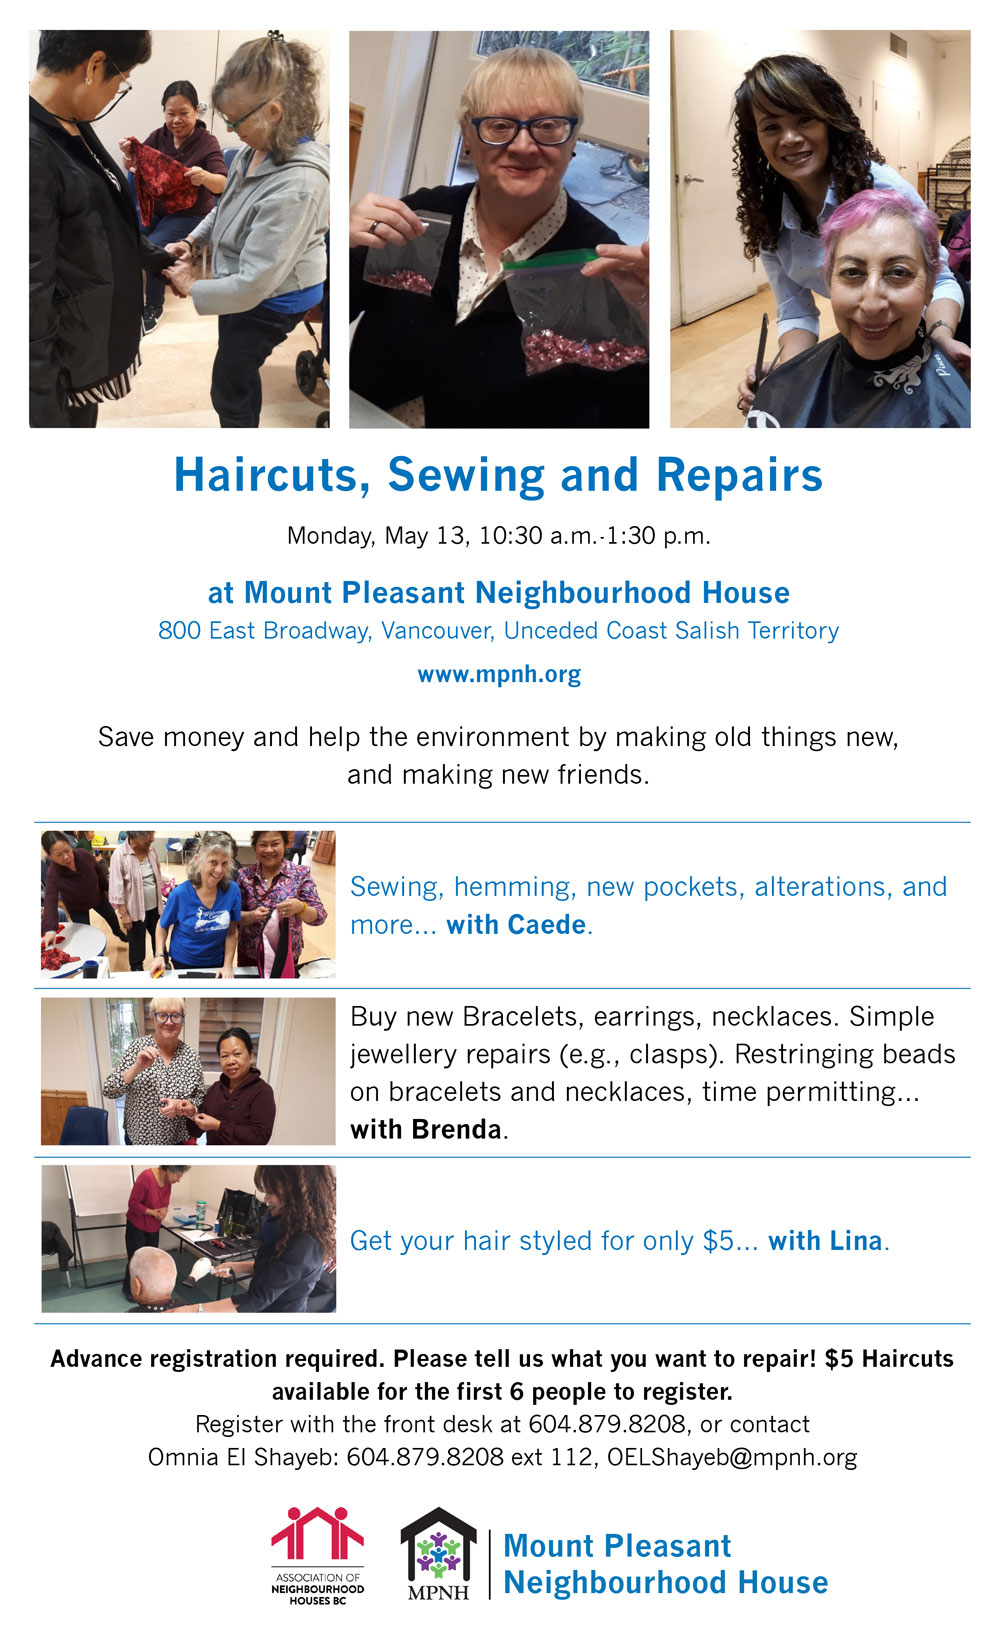 An image of the poster with event details, showing Caede doing sewing repairs, Brenda repairing jewellery, and Lina giving haircuts.